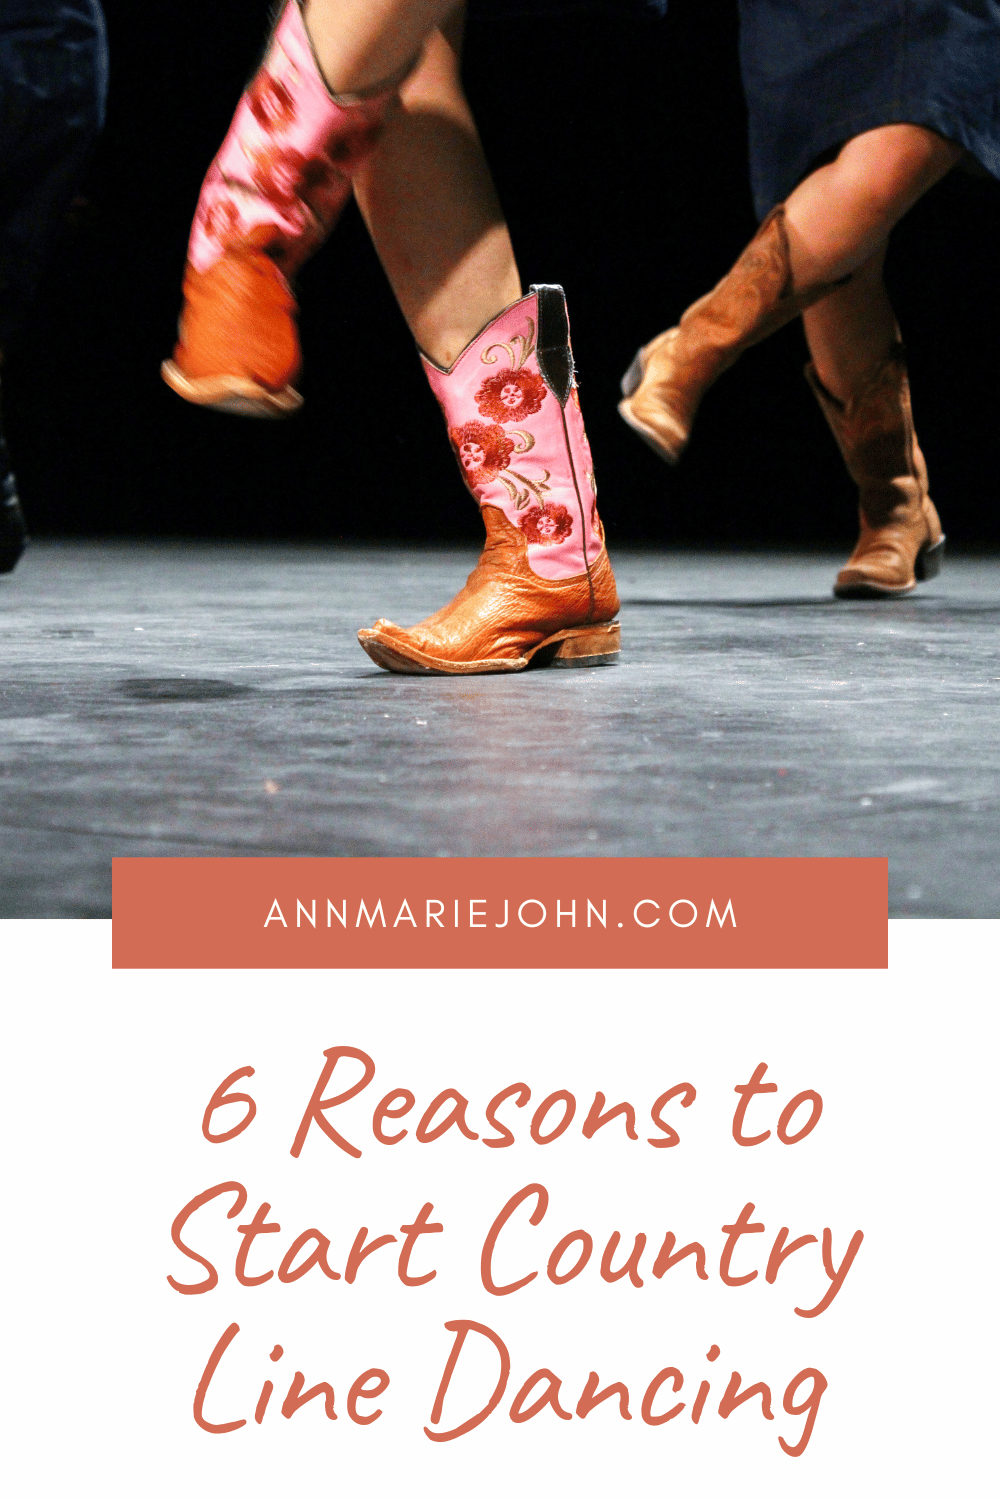 6 Reasons to Start Country Line Dancing